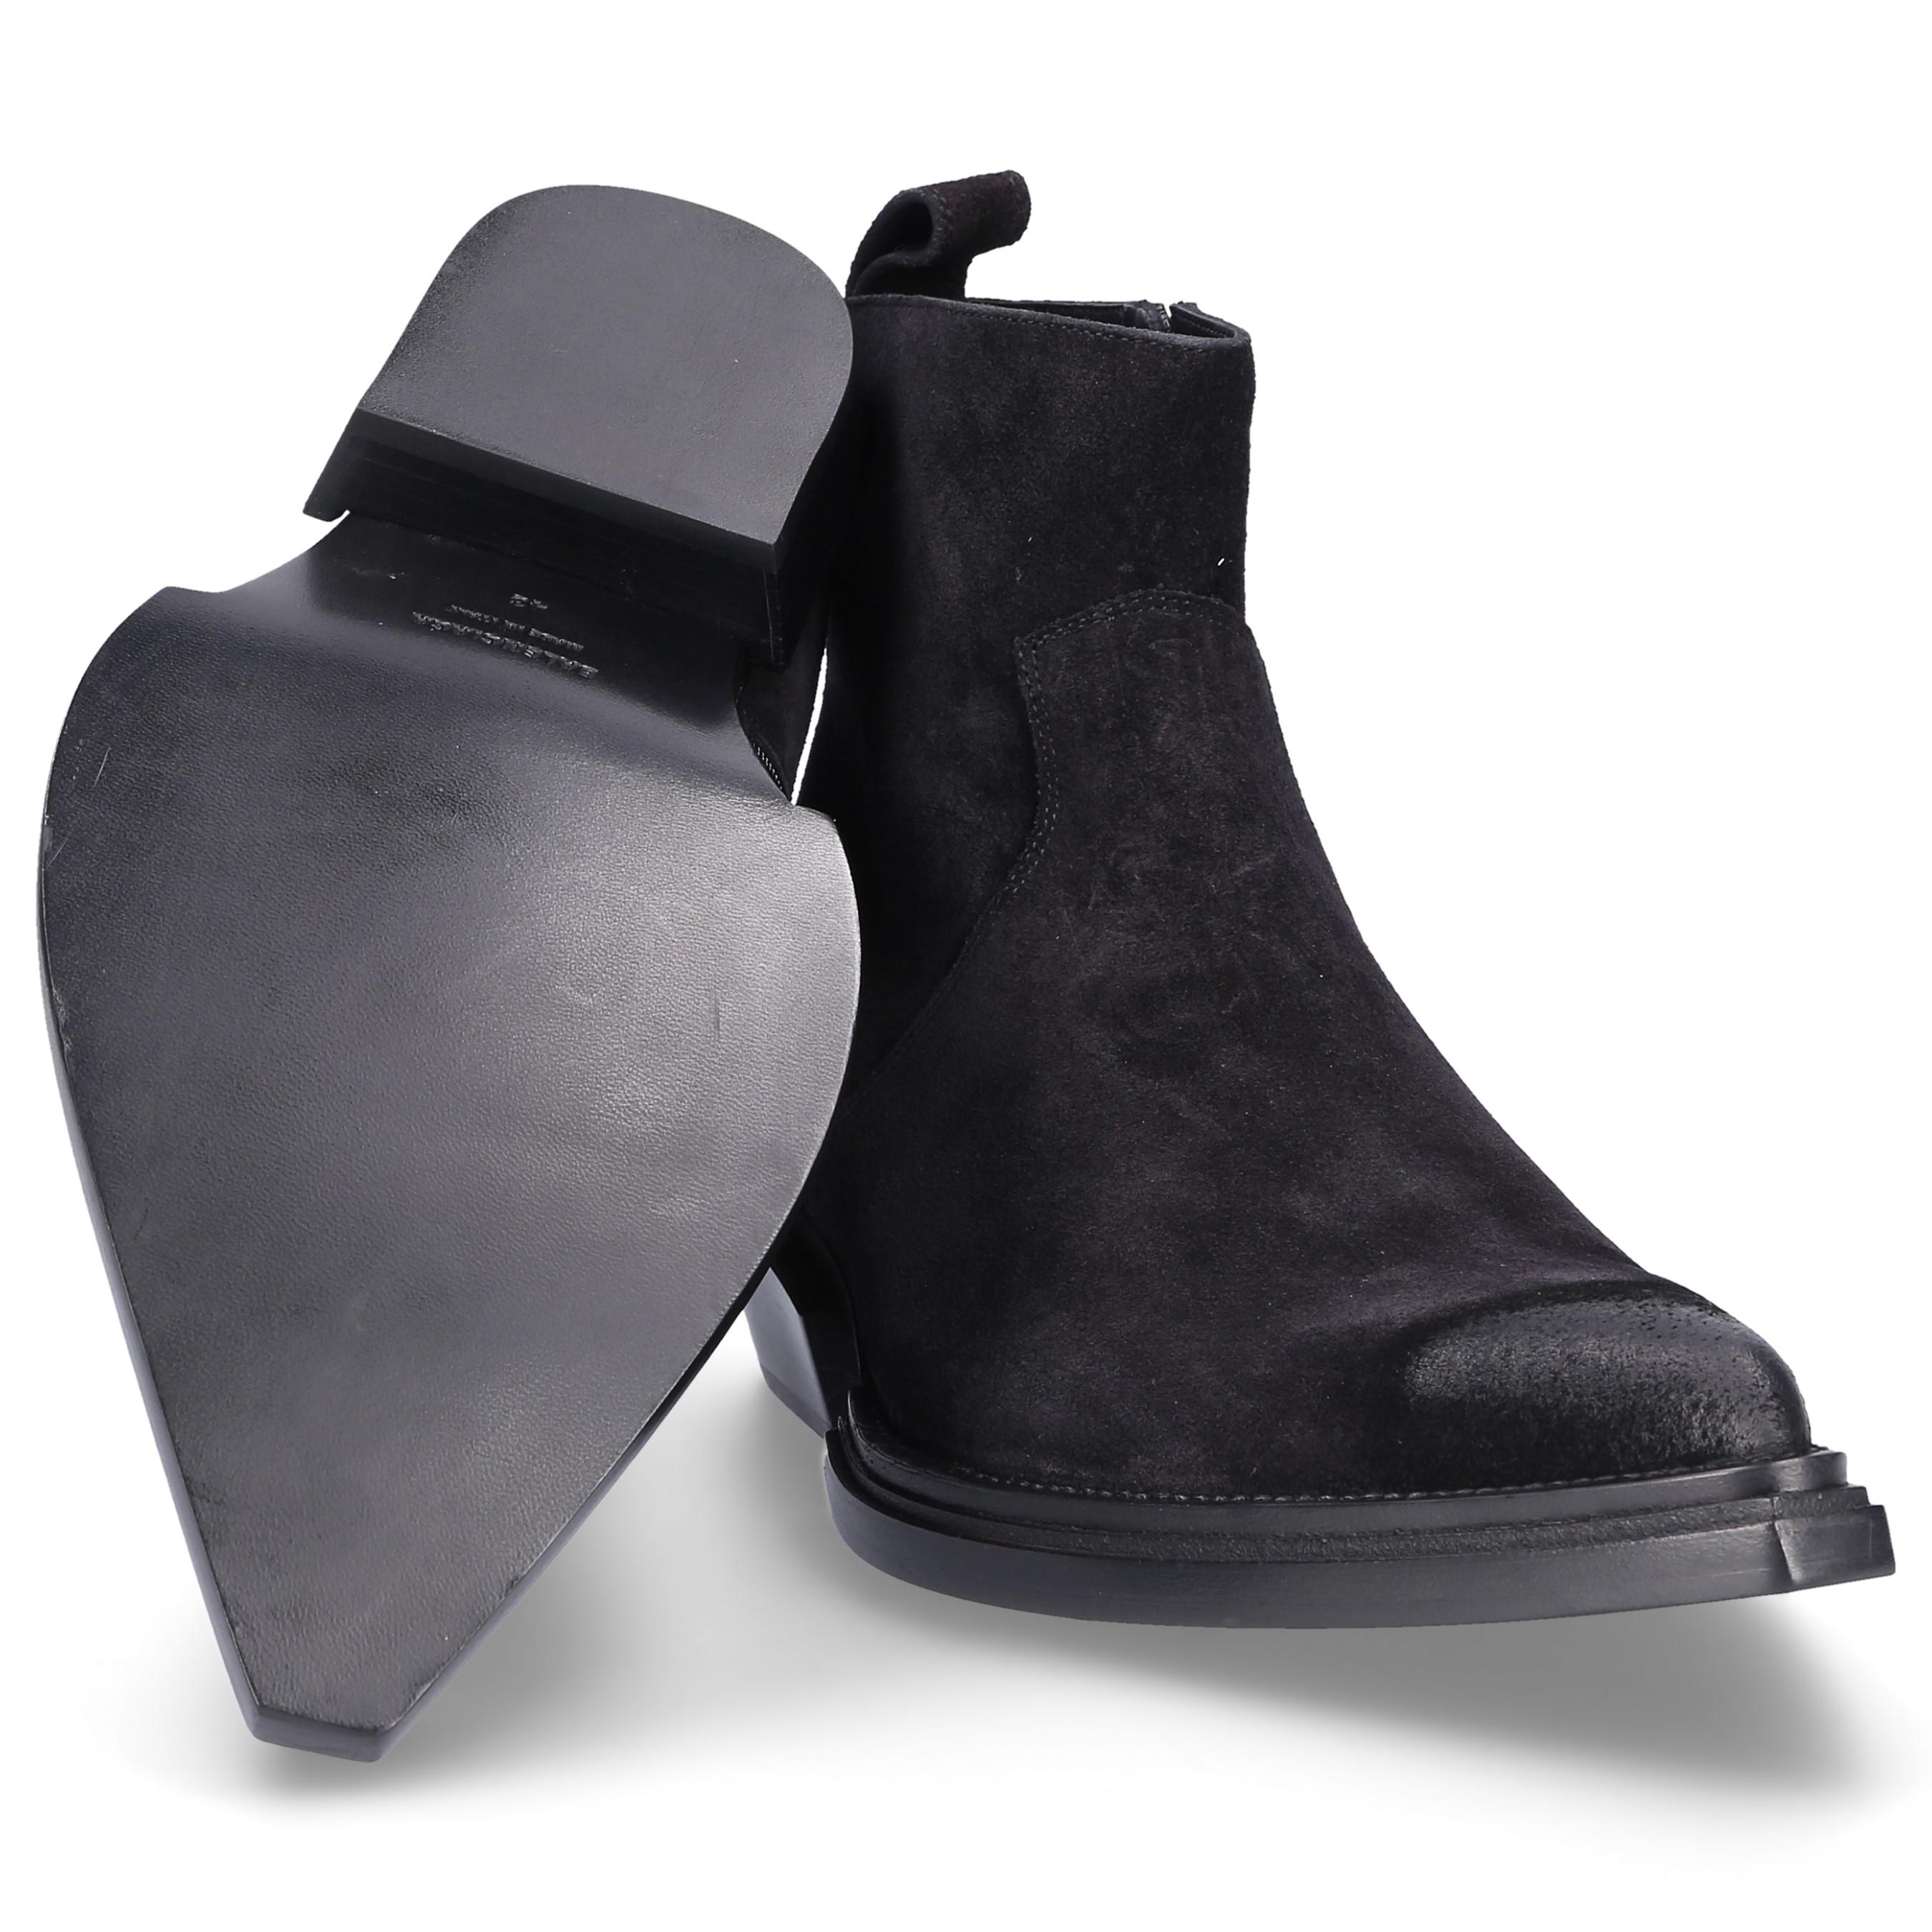 Balenciaga Santiag Suede Heeled Ankle Boots in Black for Men - Lyst